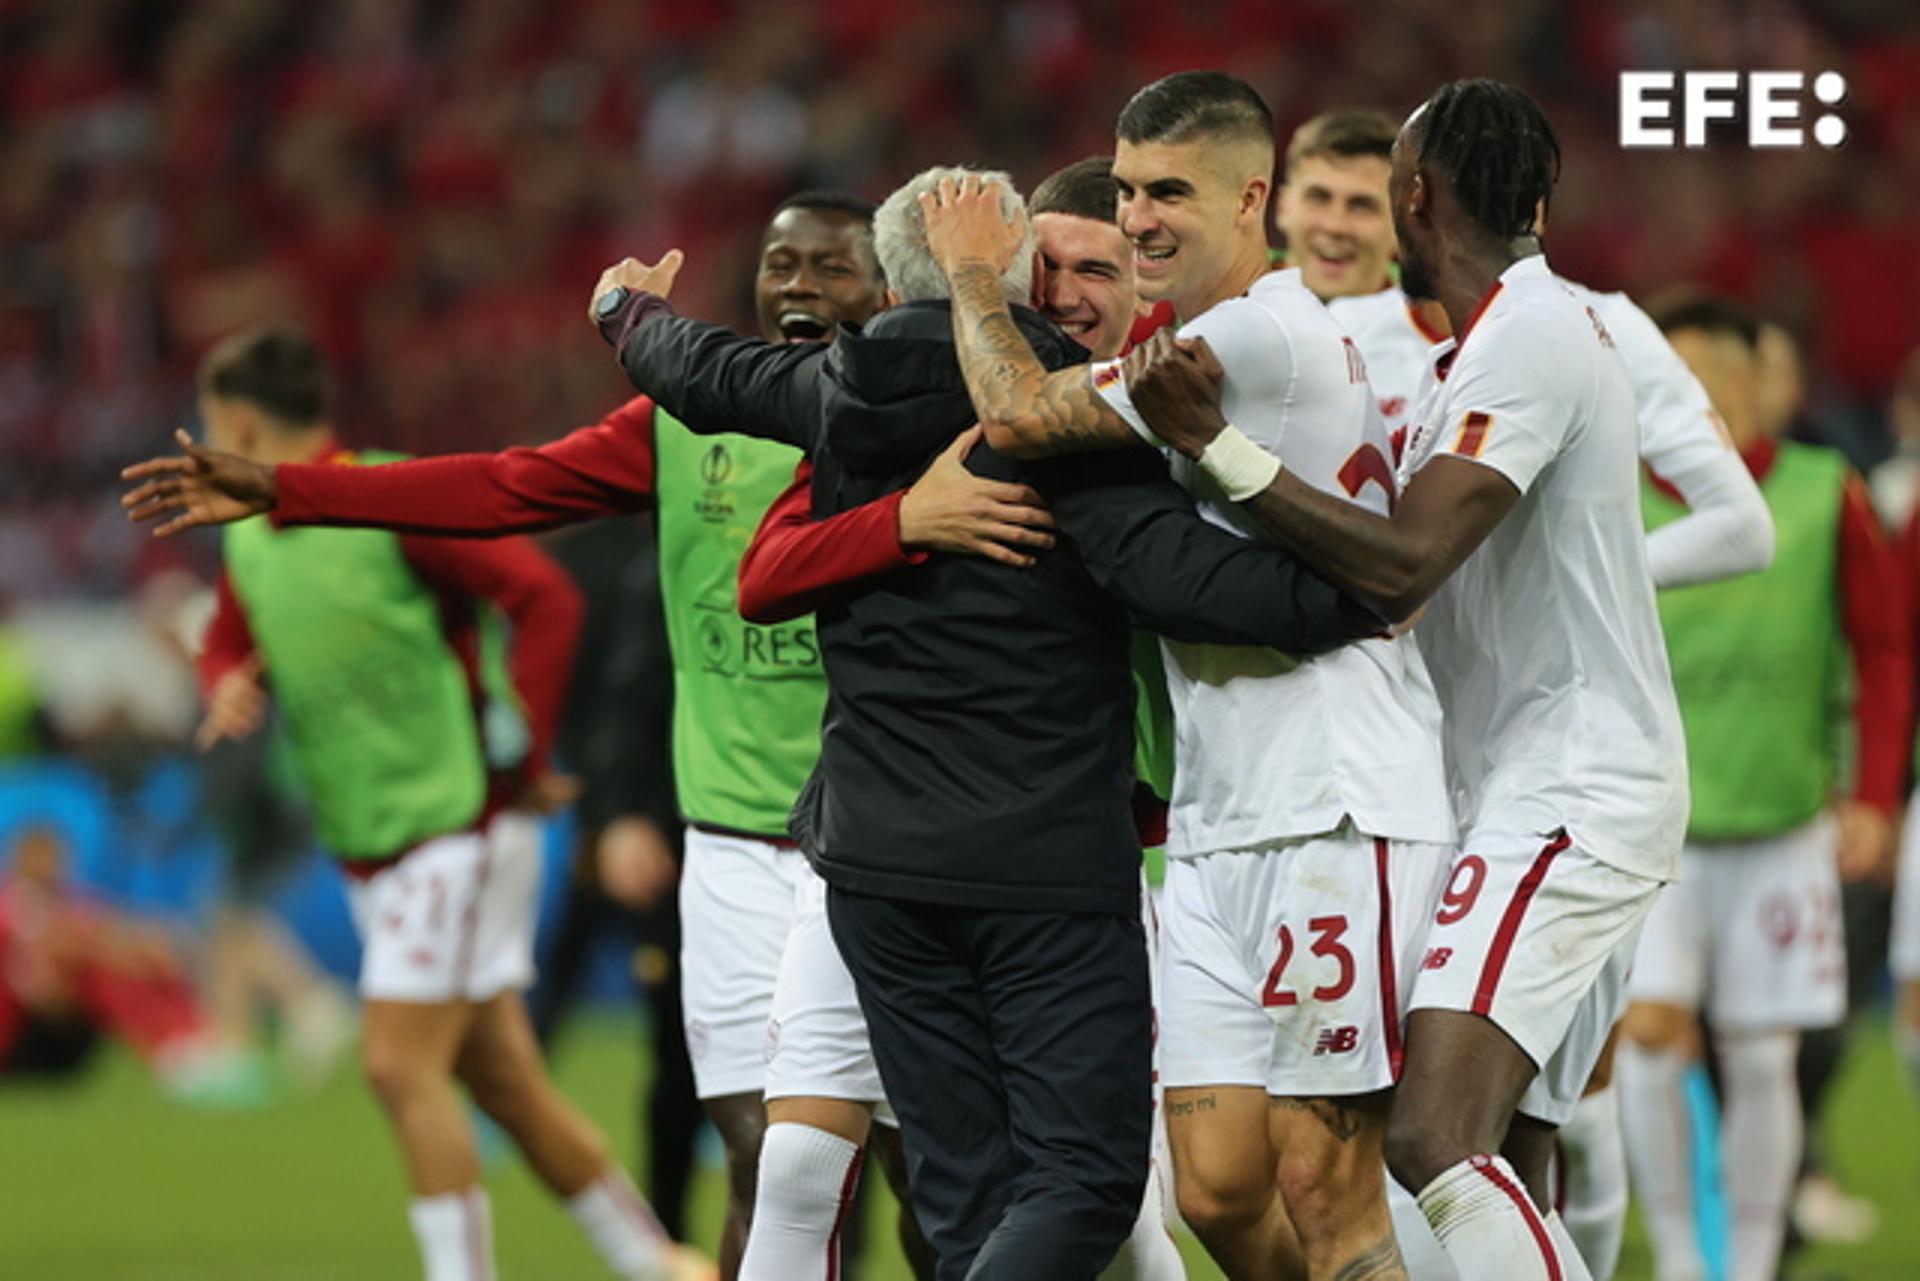 AS Roma coach Jose Mourinho (C) celebrates with his players after they defeated Bayer Leverkusen in the UEFA Europa League semifinal in Leverkusen, Germany, on 18 May 2023. EFE/EPA/FRIEDEMANN VOGEL
